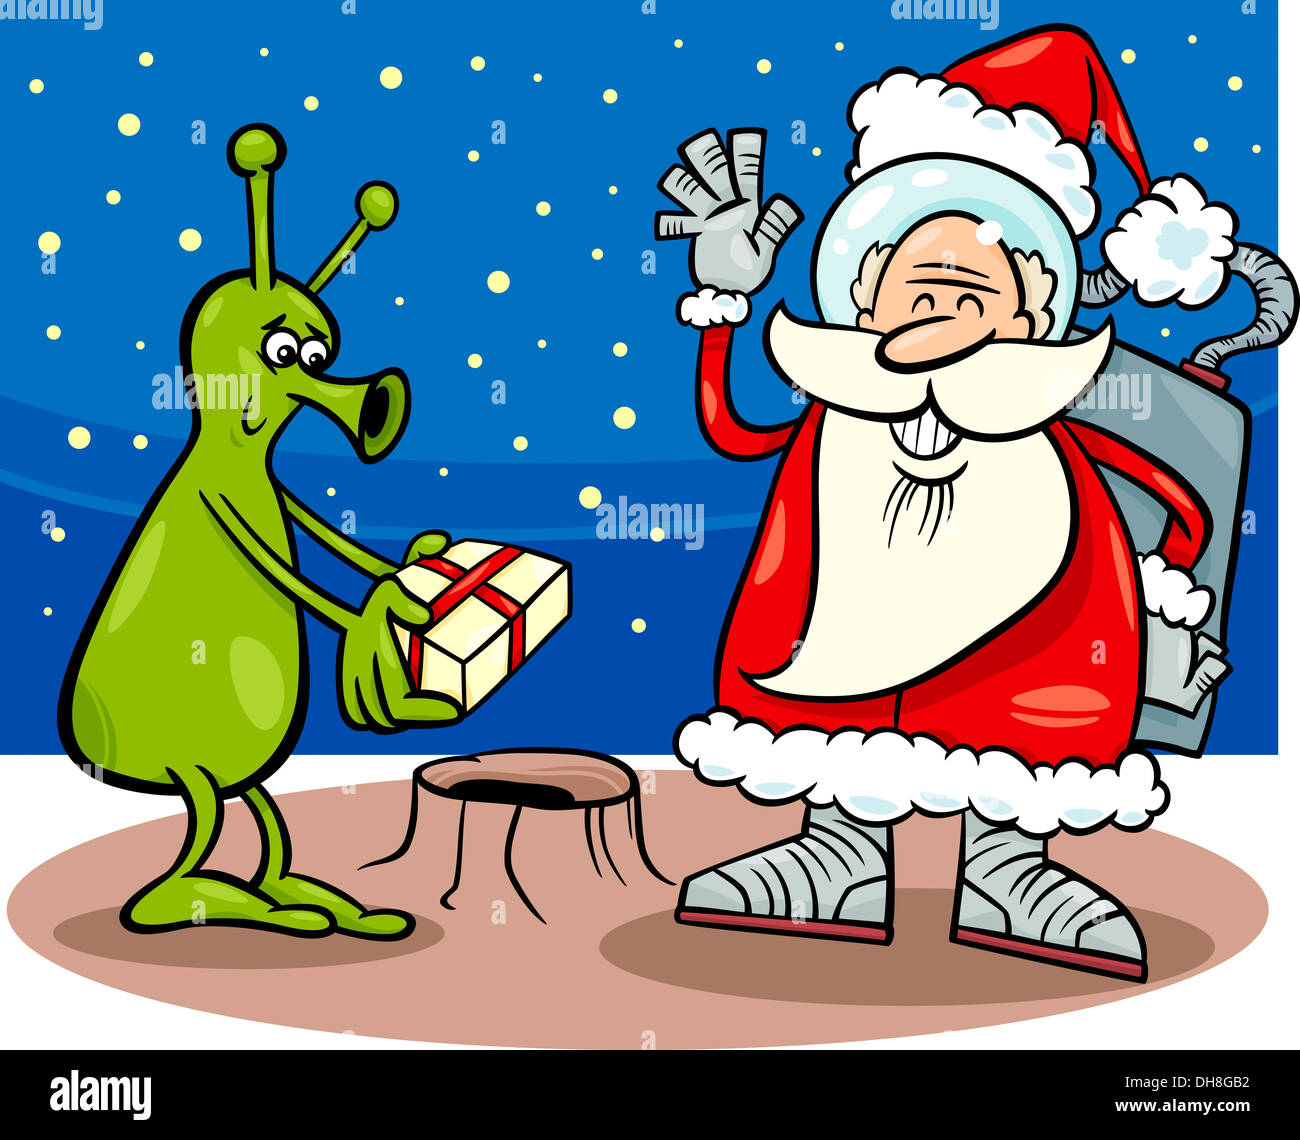 Cartoon Illustration of Santa Claus in Space giving Christmas Present to  Funny Alien Stock Photo - Alamy